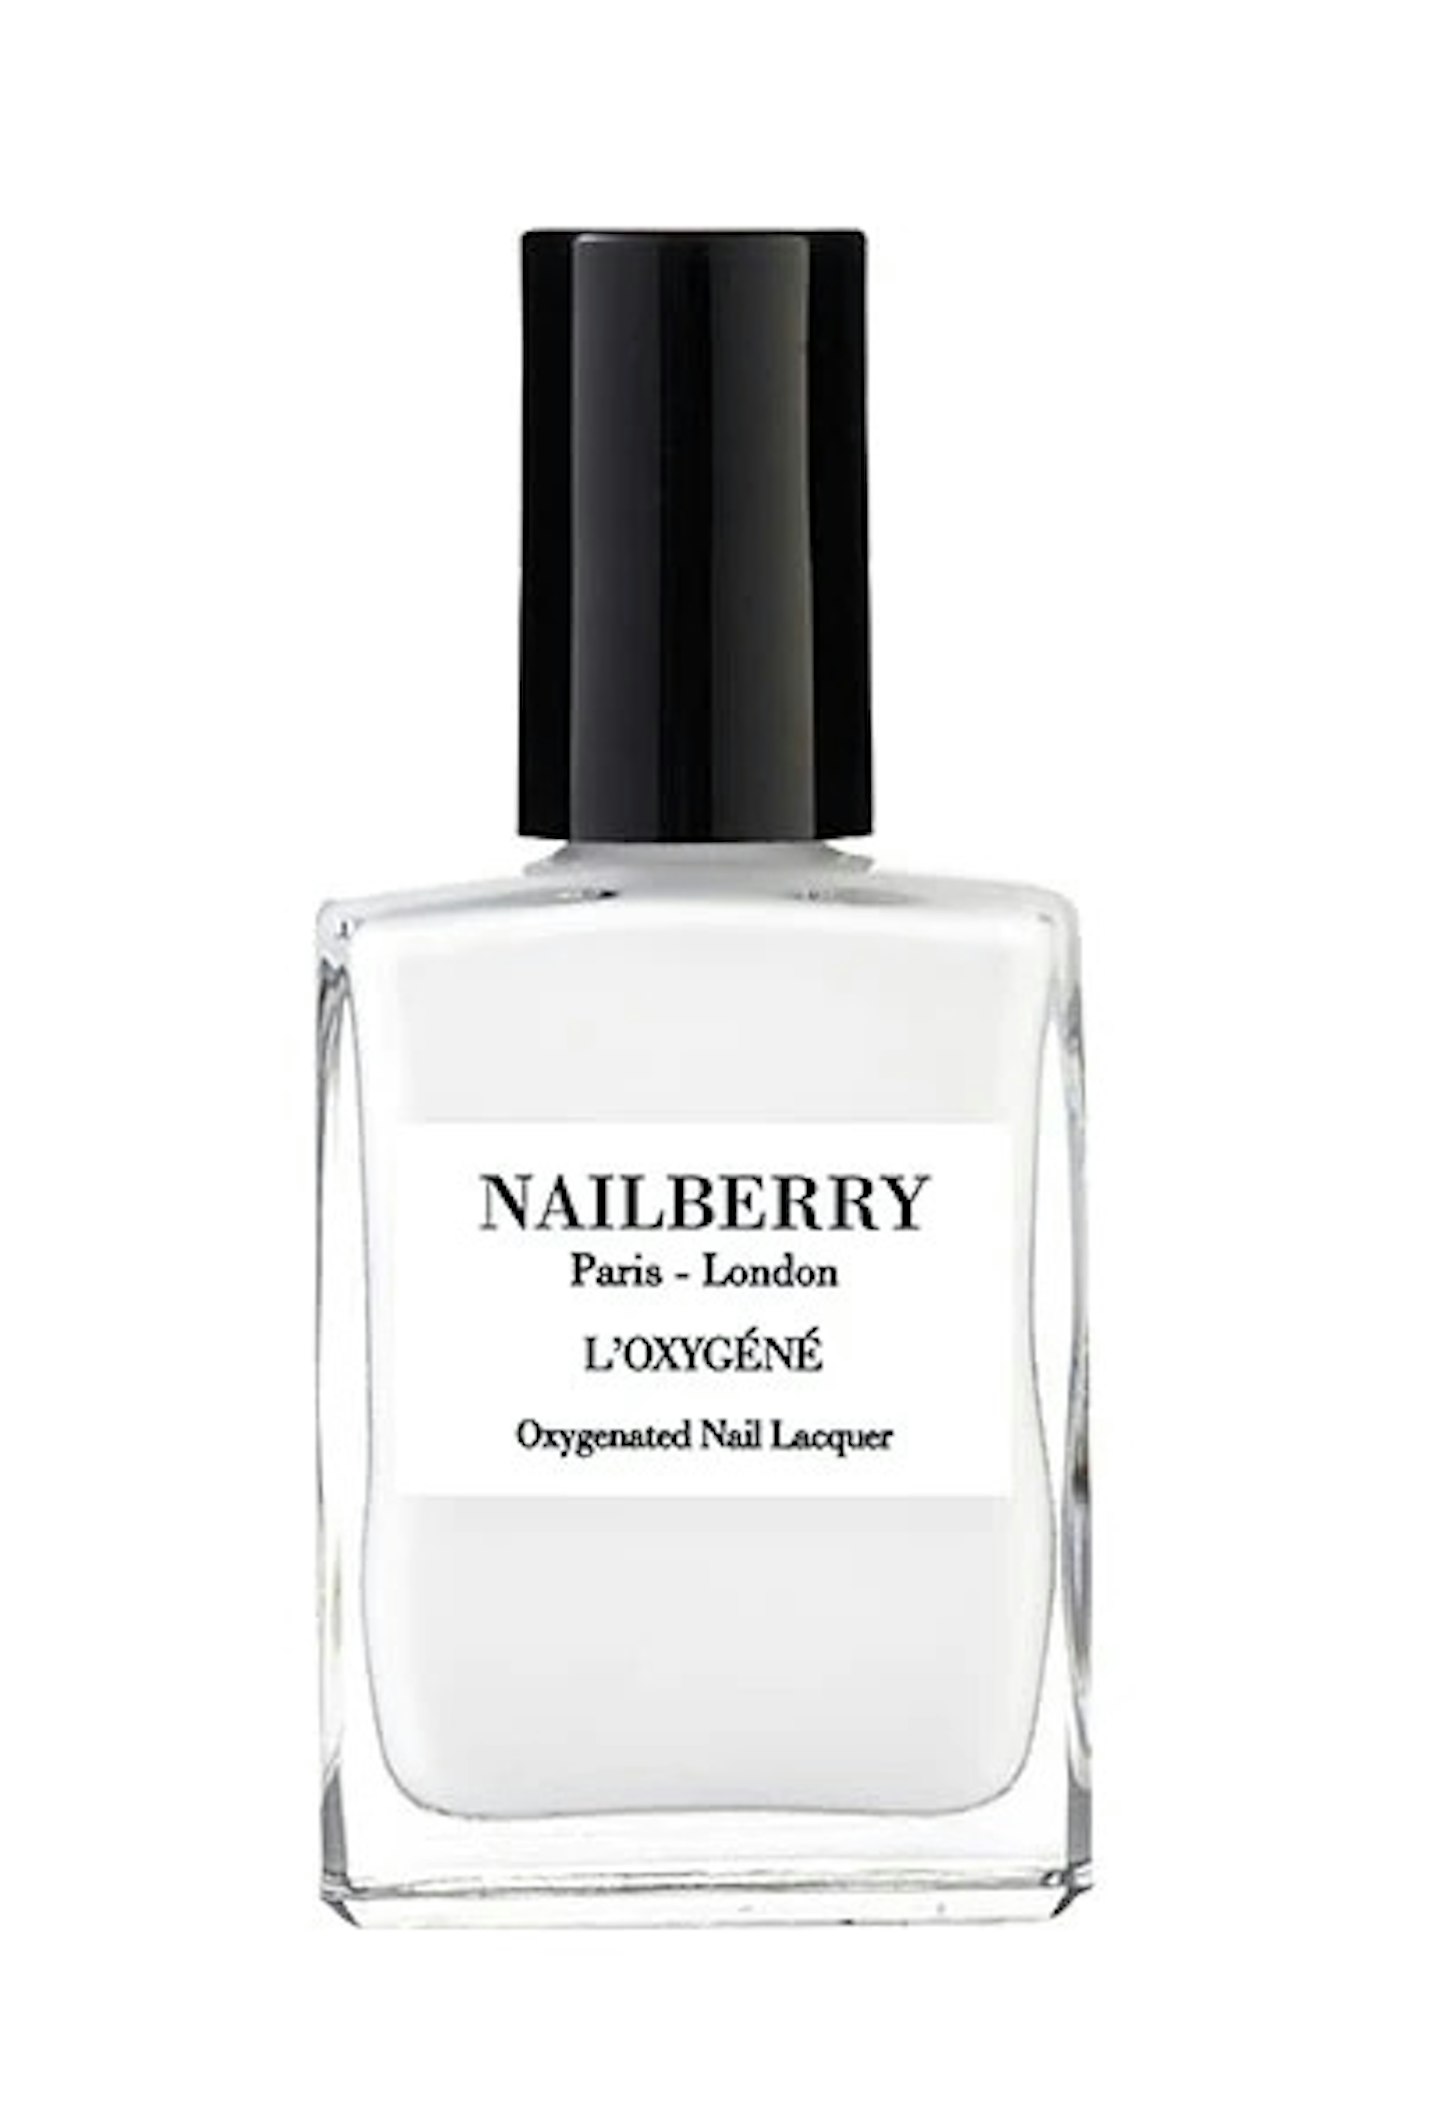 Nailberry L'oxygéné Oxygenated Nail Lacquer in Flocon 